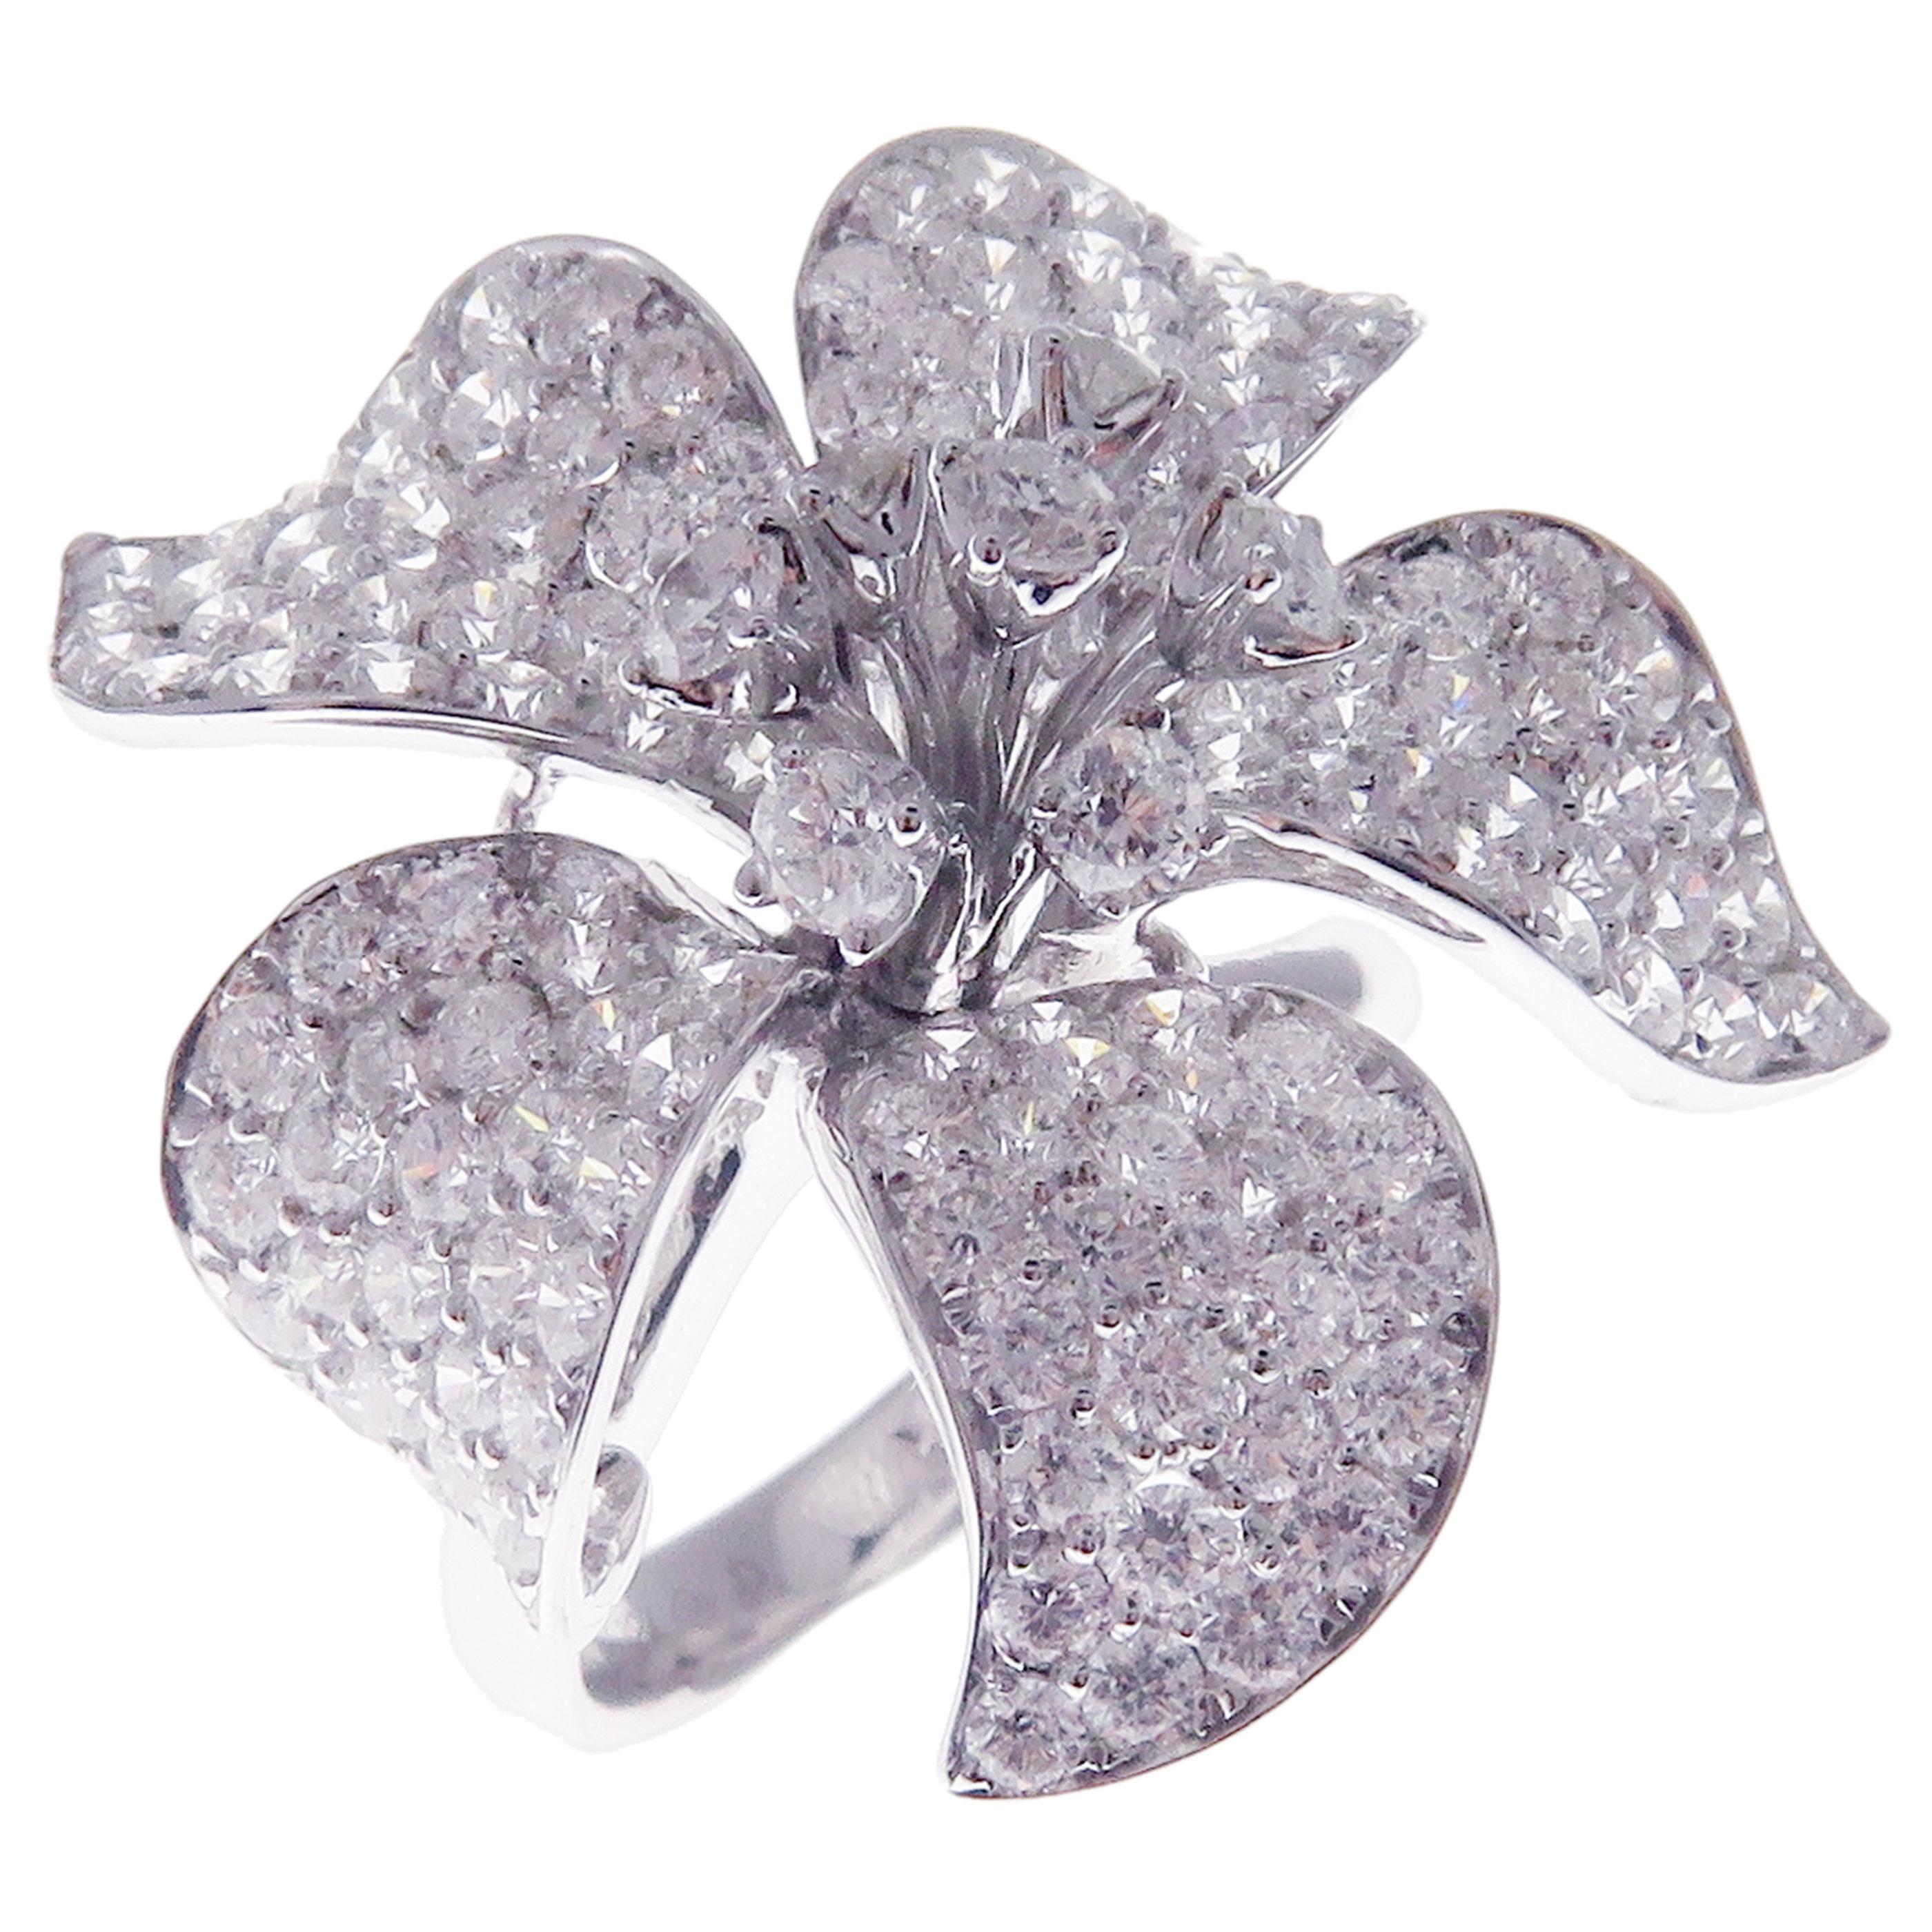 This pave diamond medium flower ring is crafted in 18-karat white gold, featuring 157 round white diamonds totaling of 4.58 carats.
Approximate total weight 10.14 grams.
Standard Ring size 7
SI-G Quality natural white diamonds.